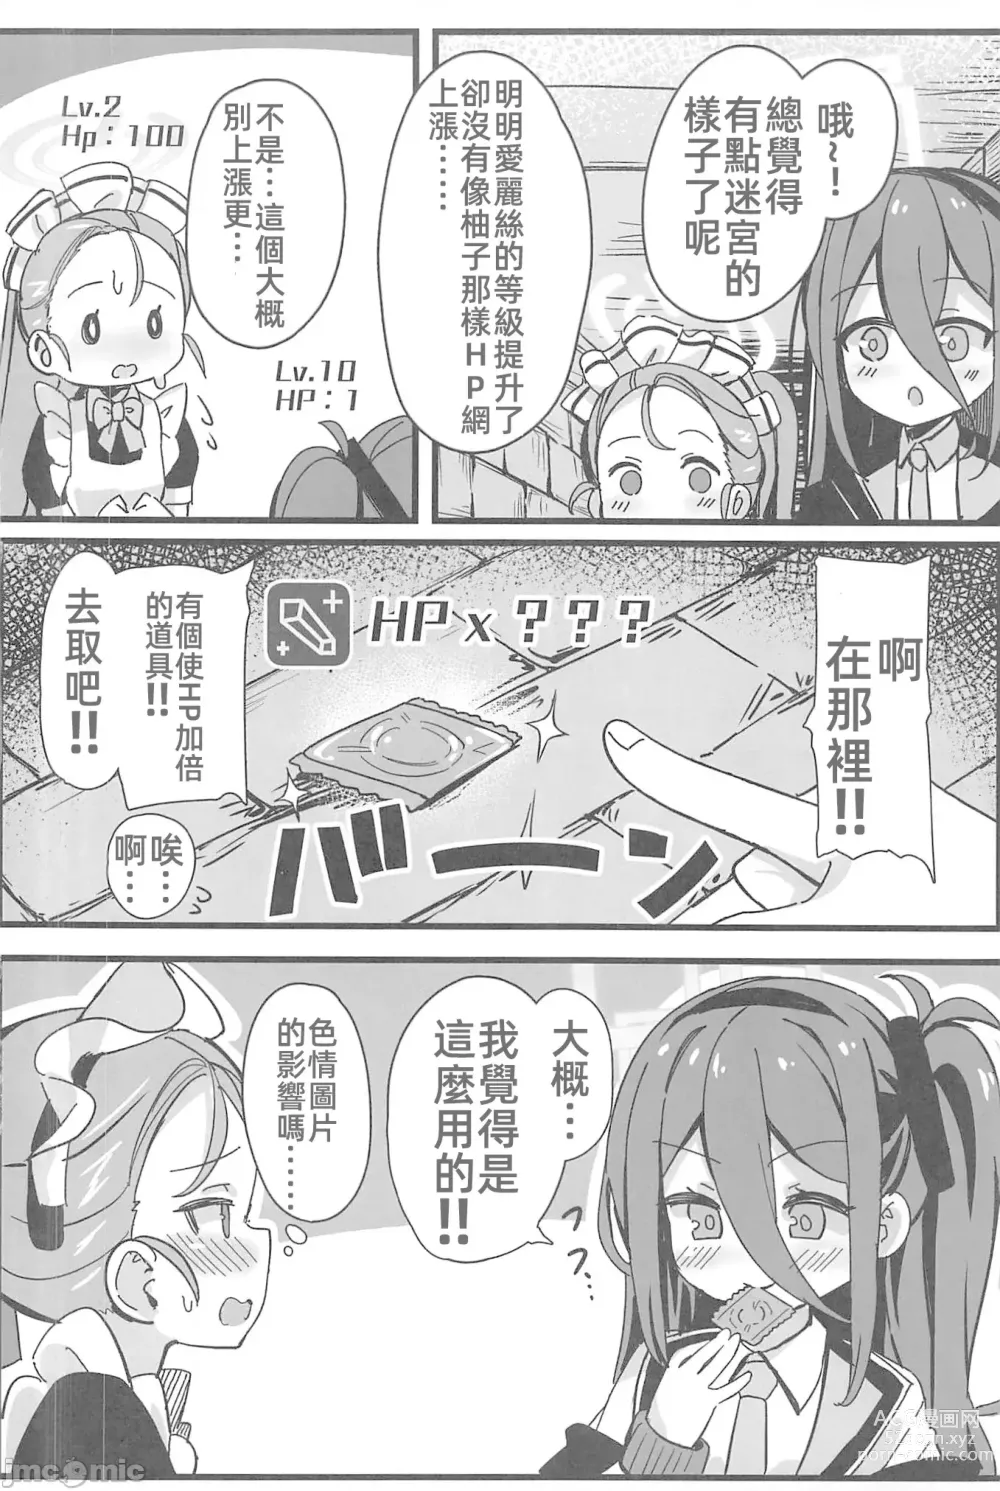 Page 9 of doujinshi 絕對要攻克給你看!!